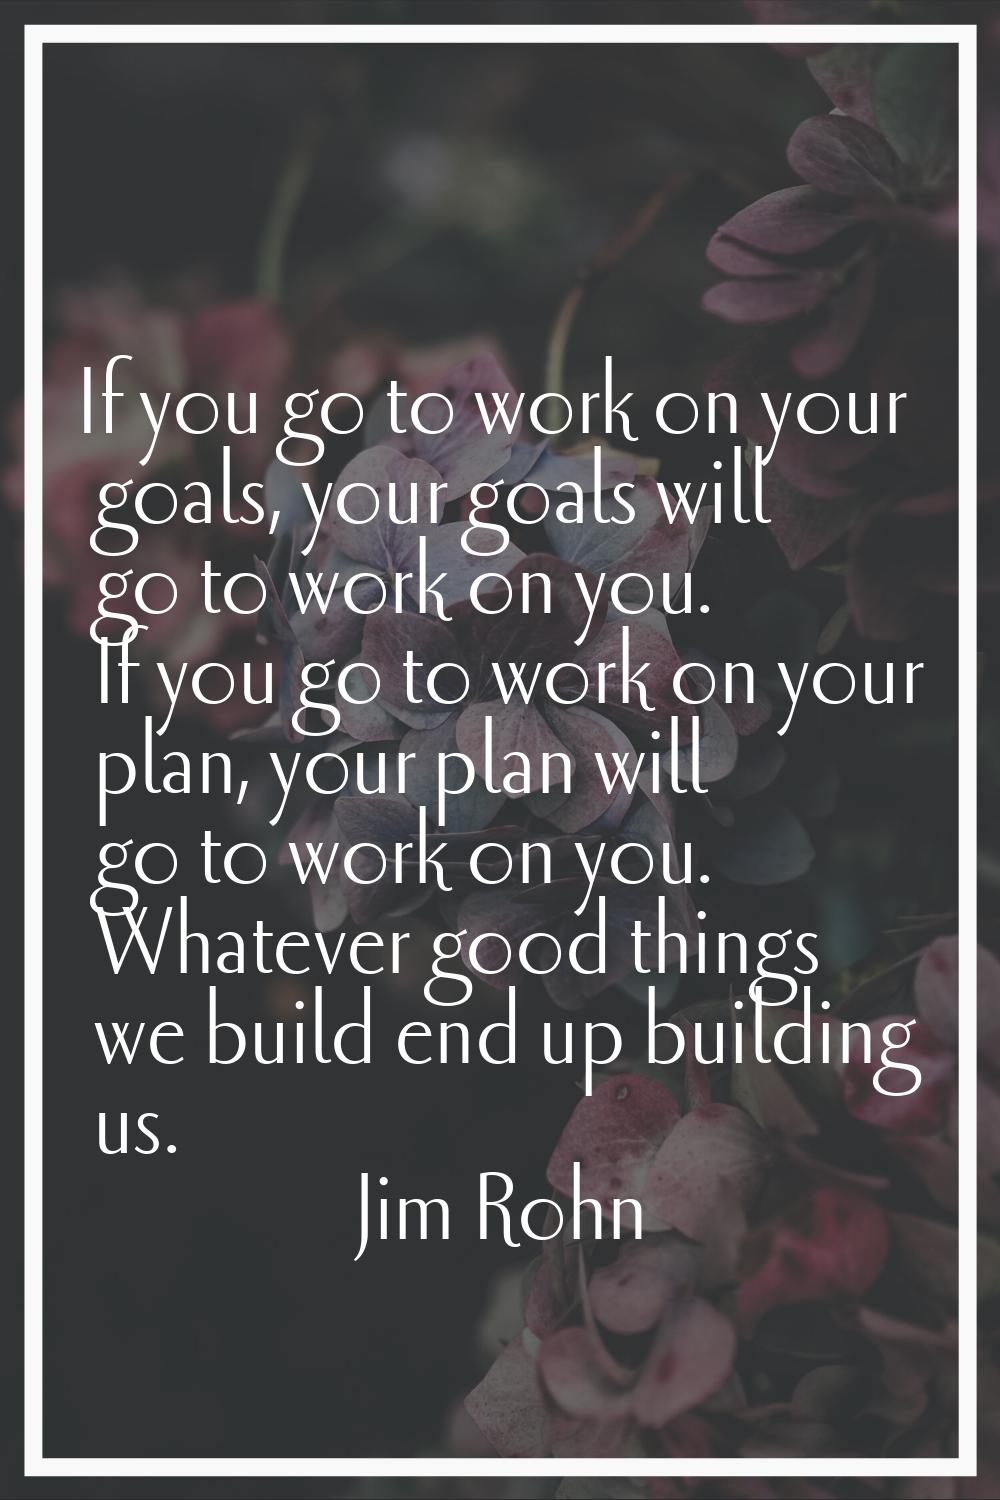 If you go to work on your goals, your goals will go to work on you. If you go to work on your plan,